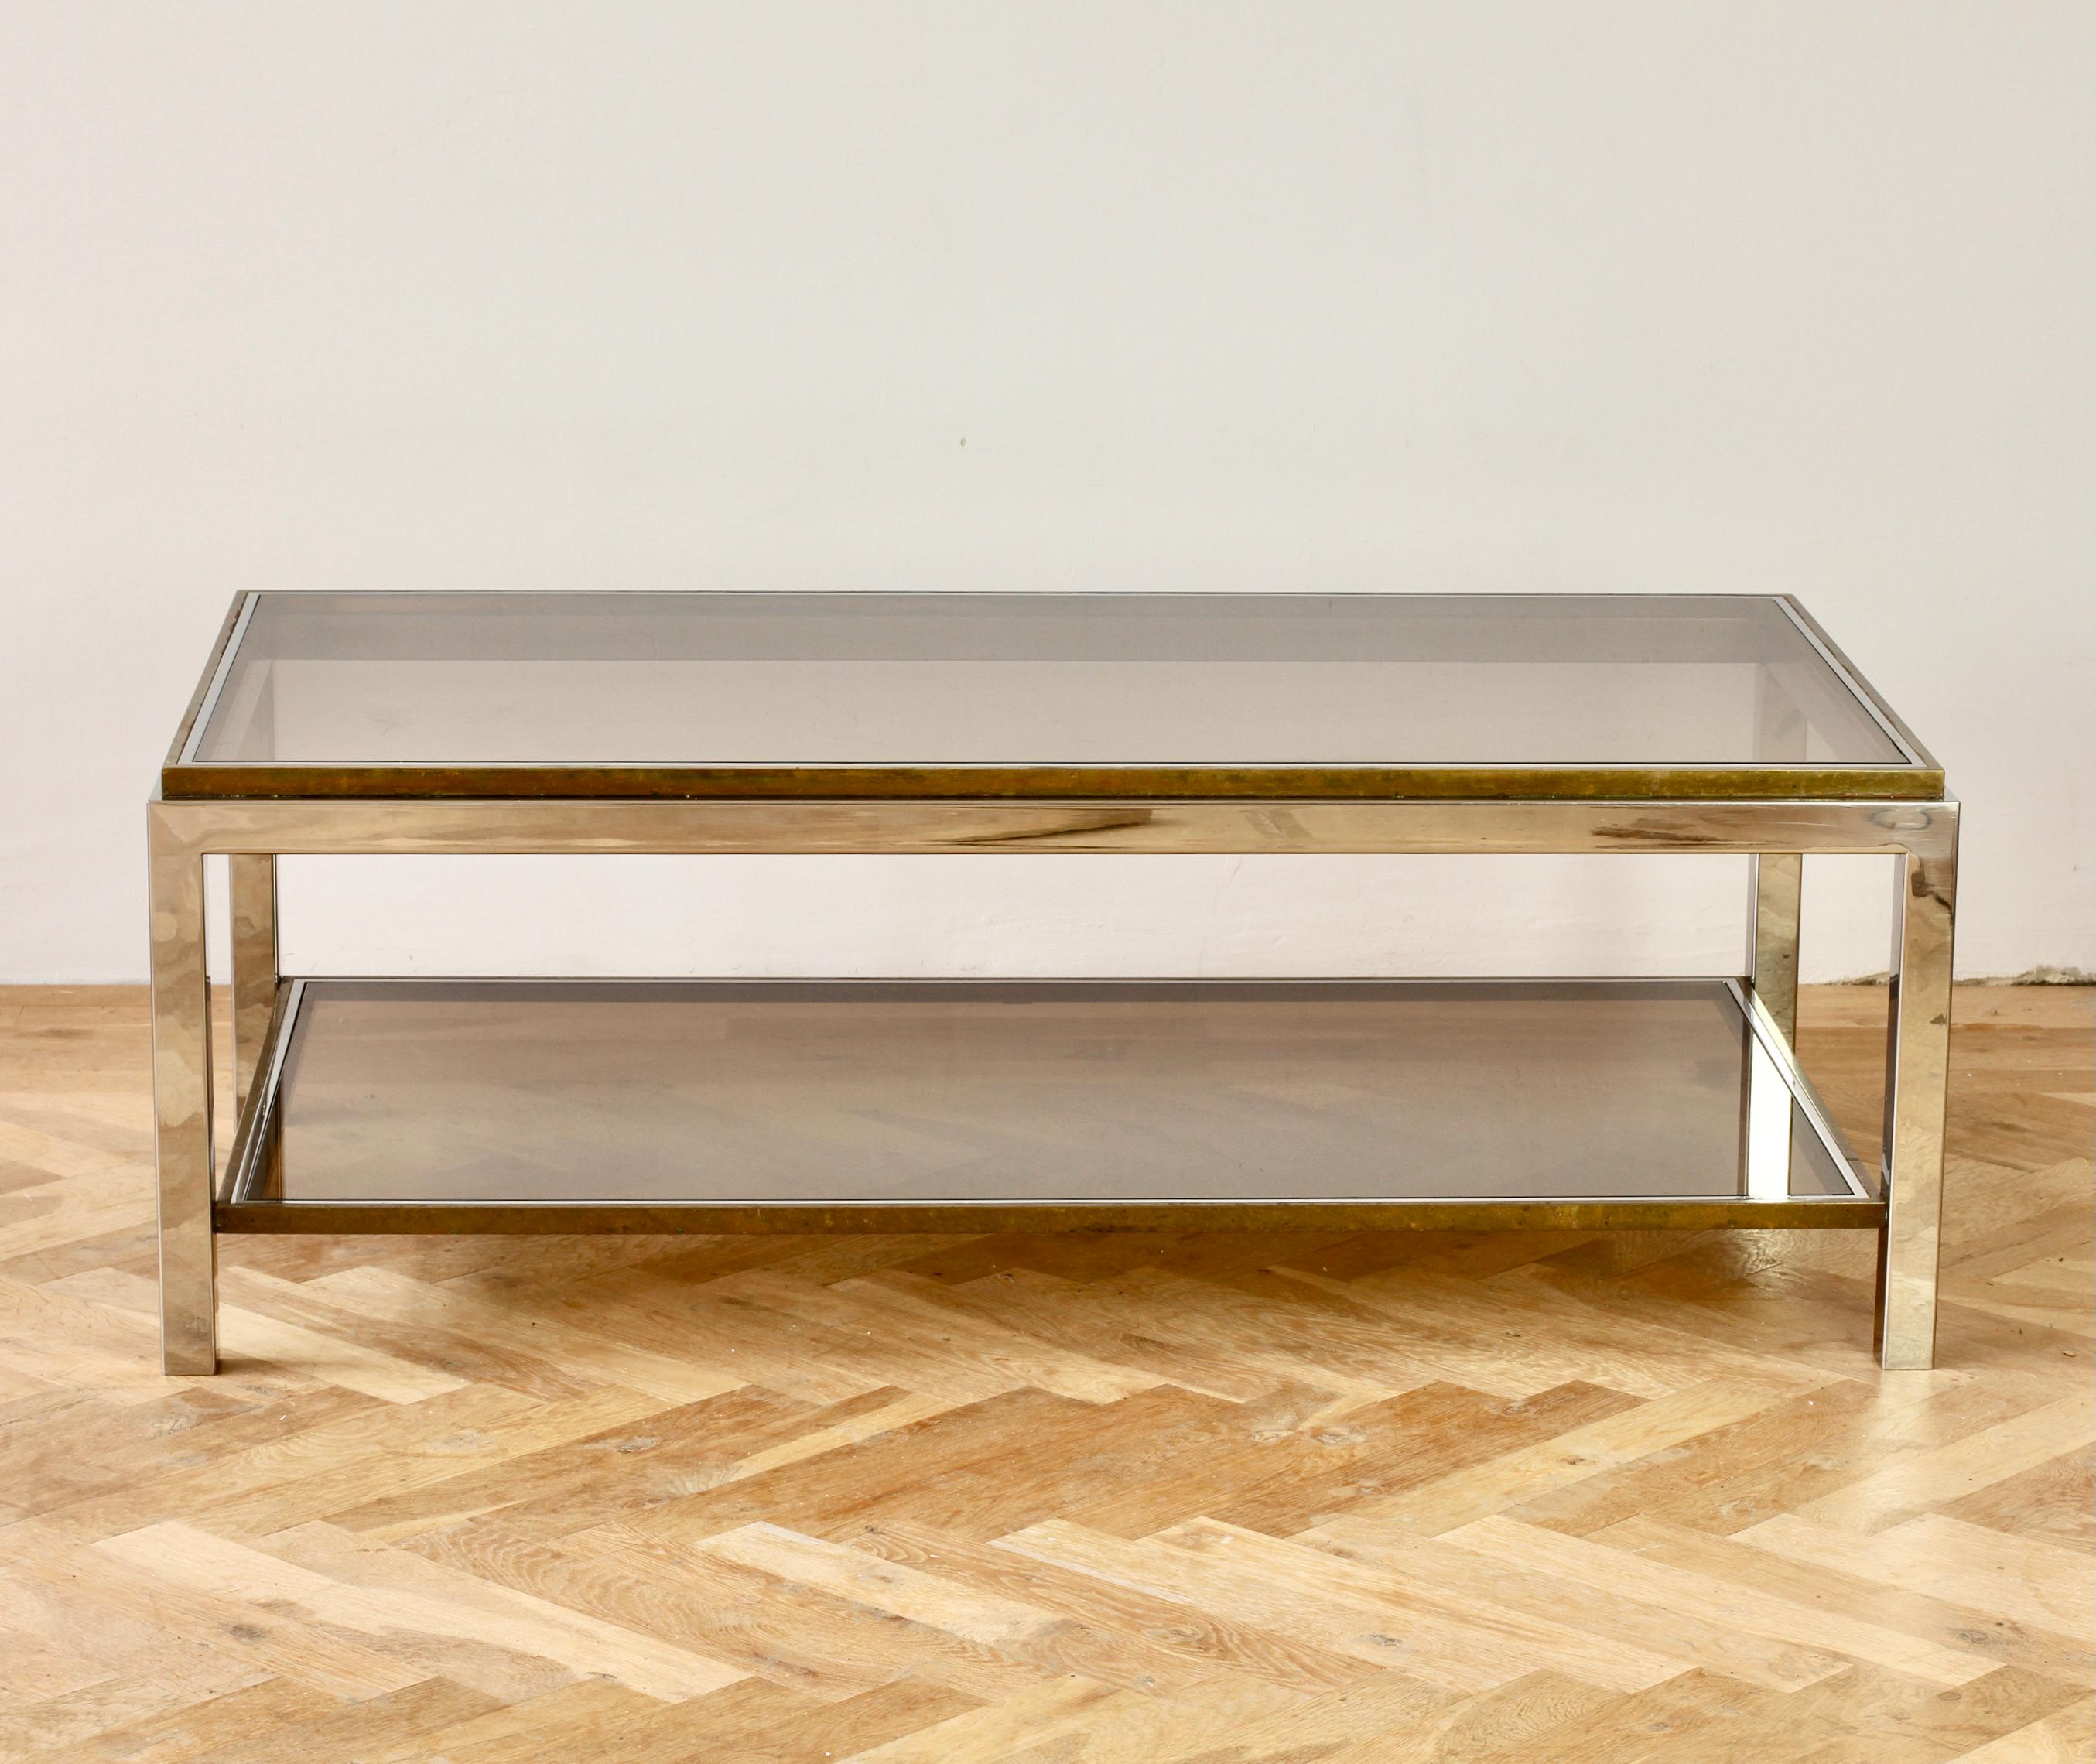 German Willy Rizzo Style Mid-Century Brass and Chrome Bicolor Coffee Table, circa 1970s For Sale